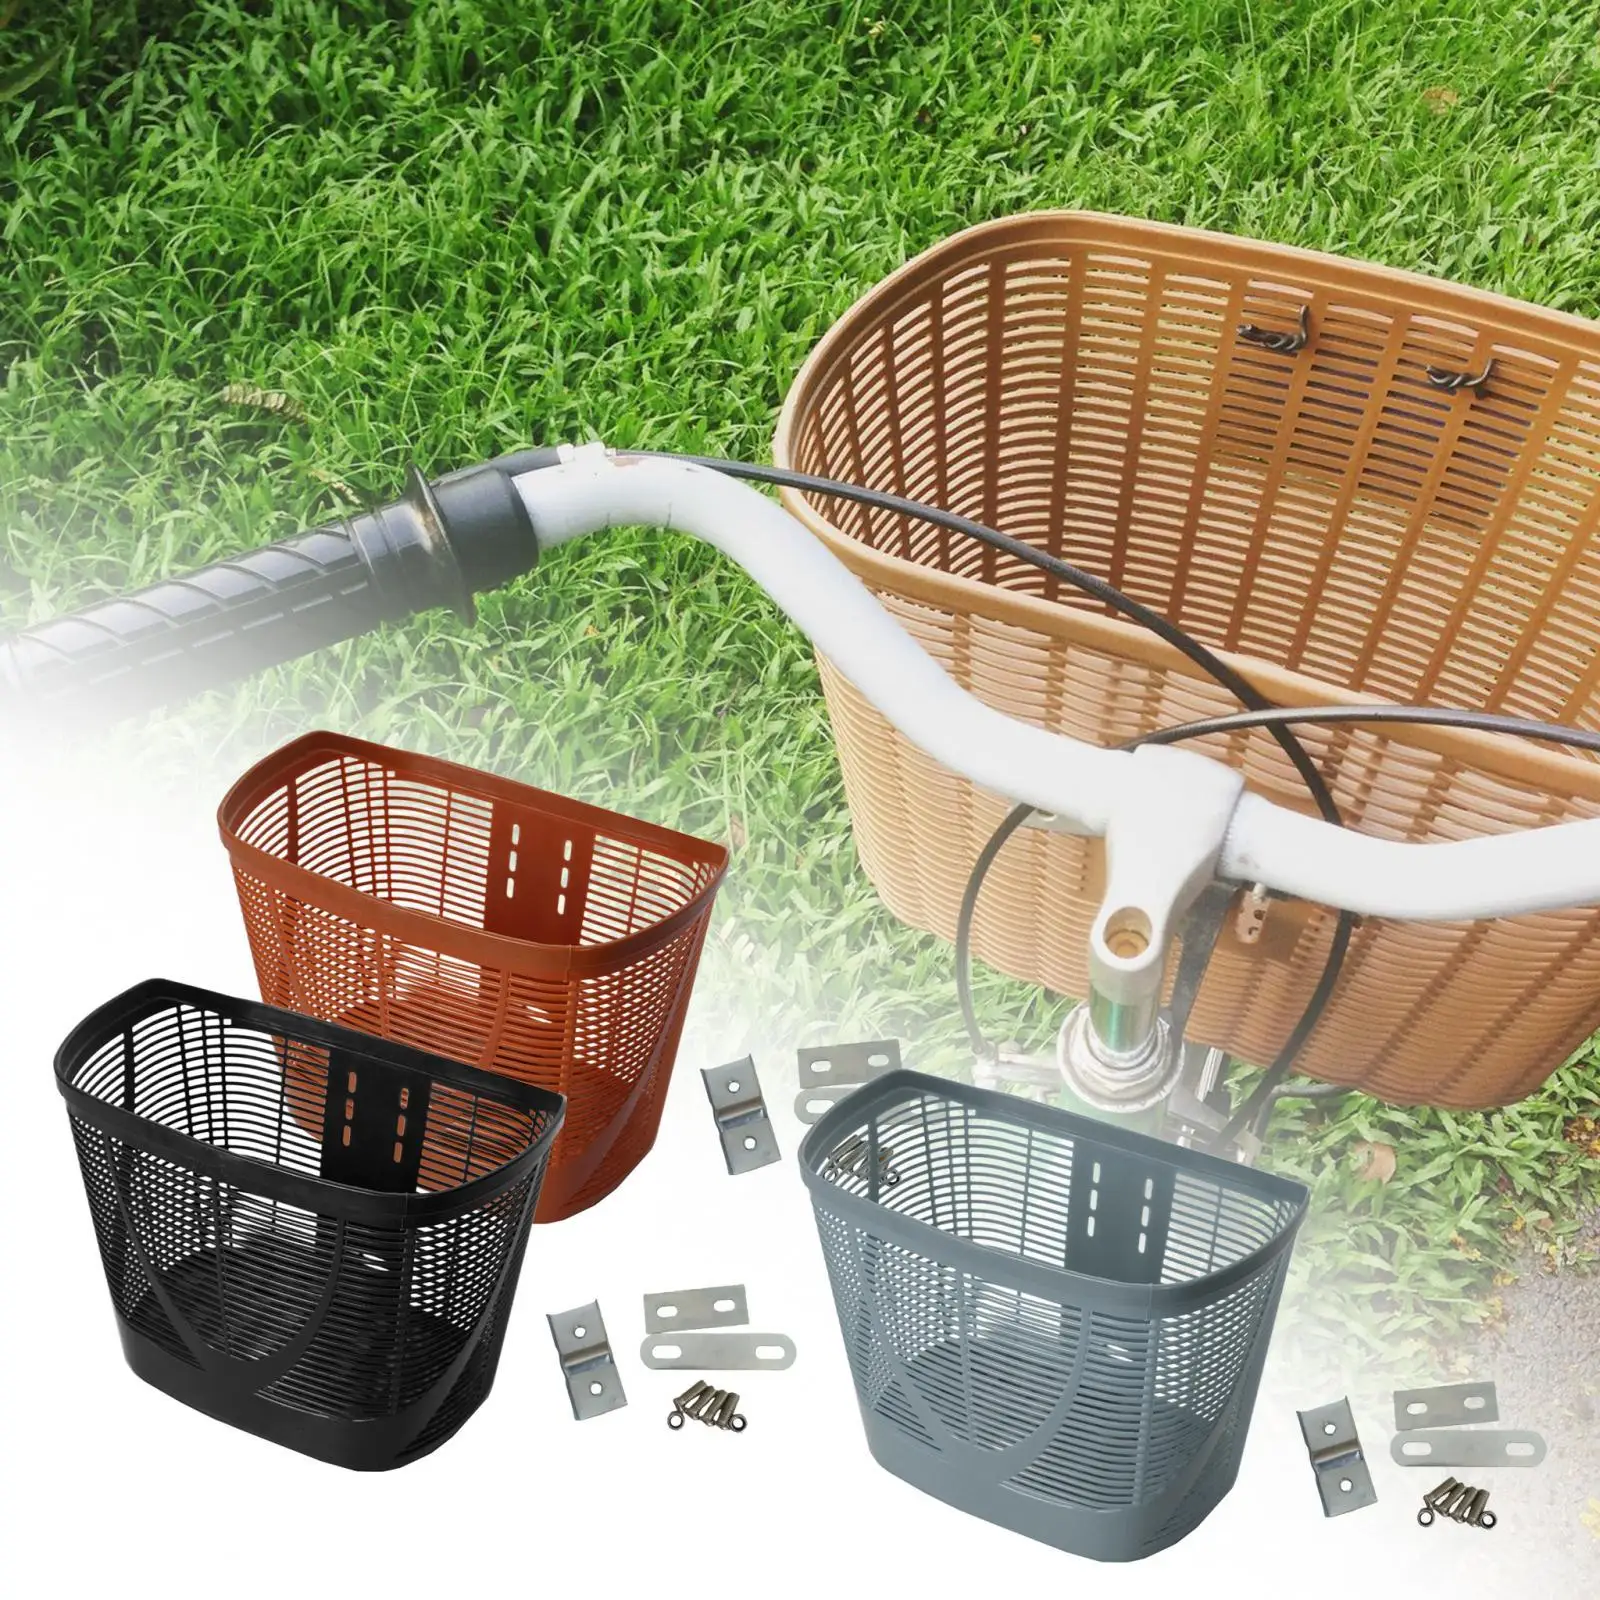 Bike Basket Carrier Basket for Dog Puppy Cats Front Basket Plastic Easy to Clean for Shopping Outdoor Picnic Bike Accessories